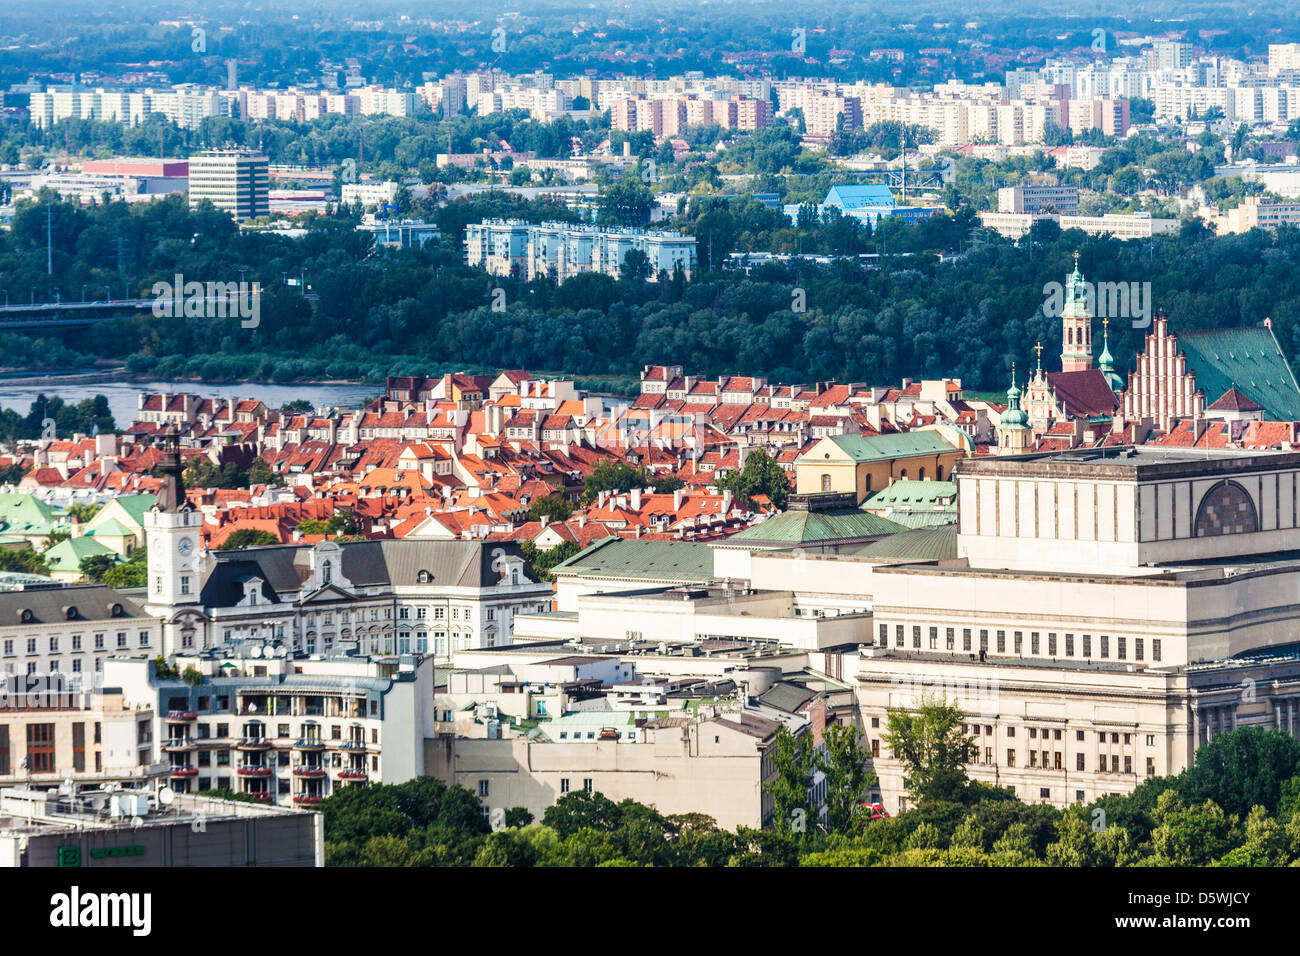 View over Old Town, Stare Miasto and the borough of Praga on the east bank of the river Vistula in Warsaw, Poland. Stock Photo